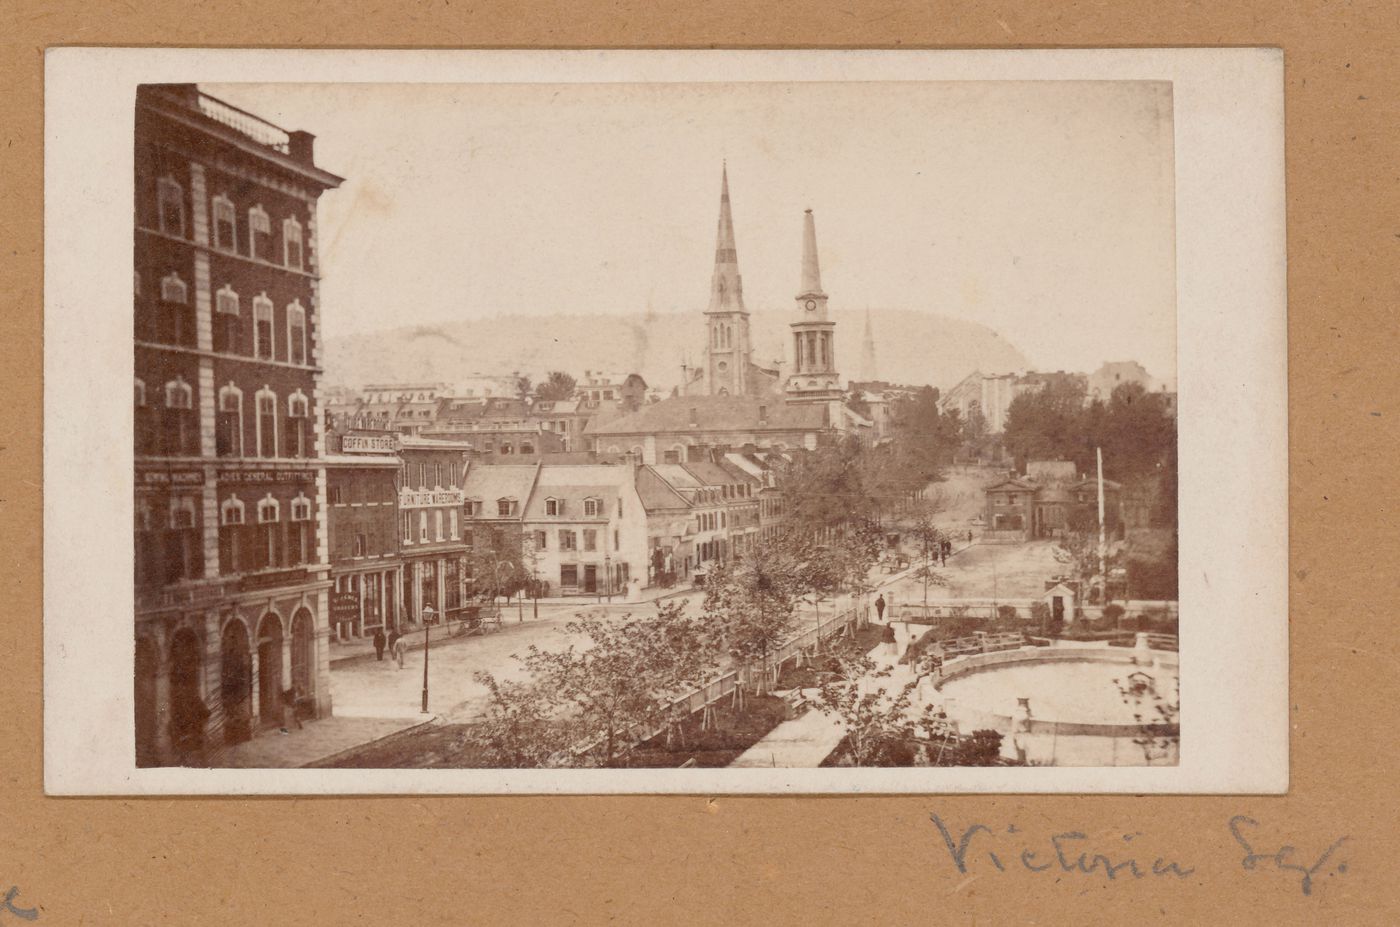 Partial view of Victoria Square showing the fountain, stores, the old YMCA Headquarters on the left and Mount Royal in the background, Montréal, Canada (now Montréal, Québec, Canada)